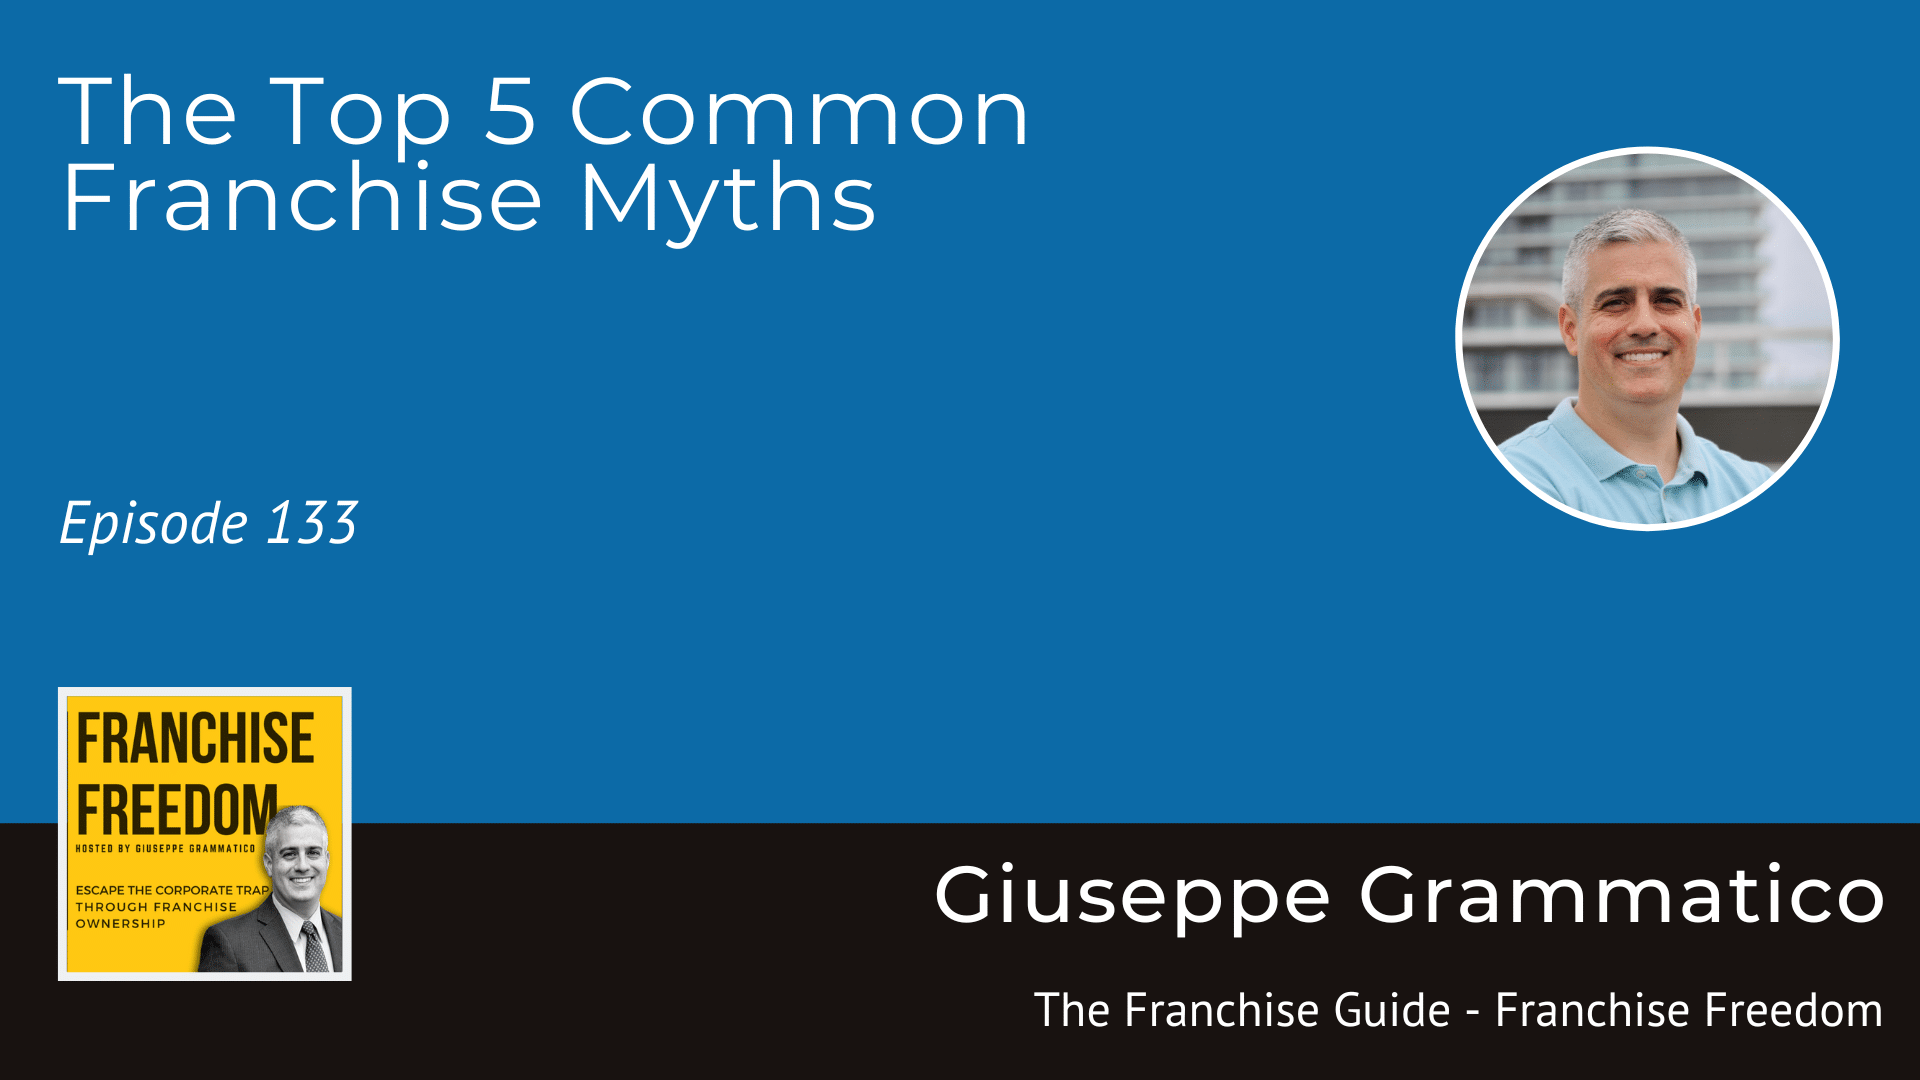 The Top 5 Common Franchise Myths